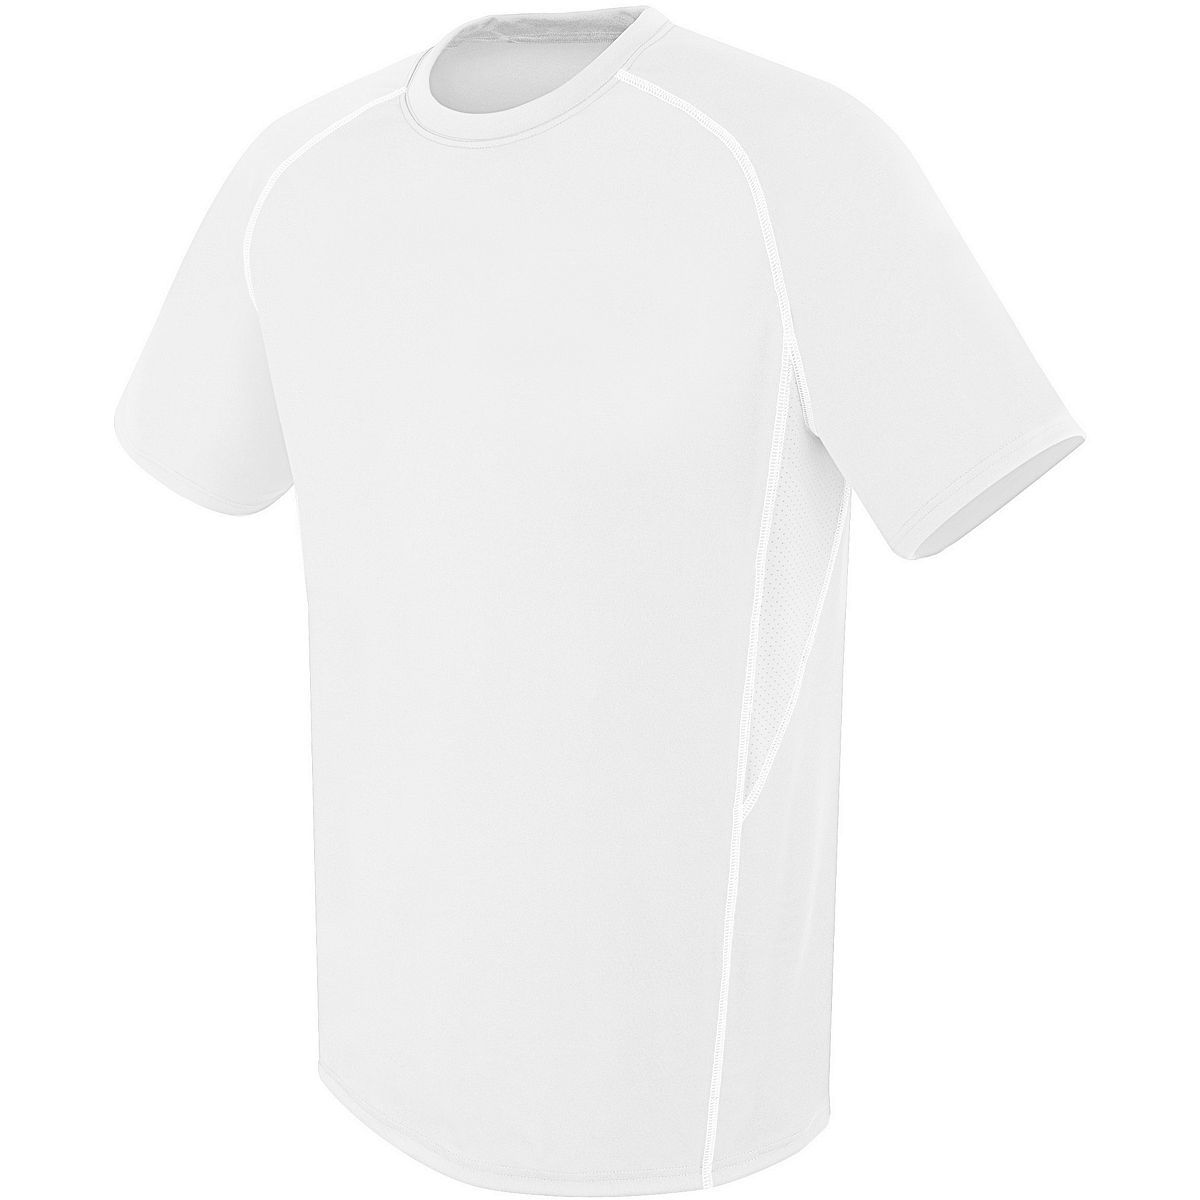 High 5 Evolution Short Sleeve in White/White/White  -Part of the Adult, High5-Products, Shirts product lines at KanaleyCreations.com